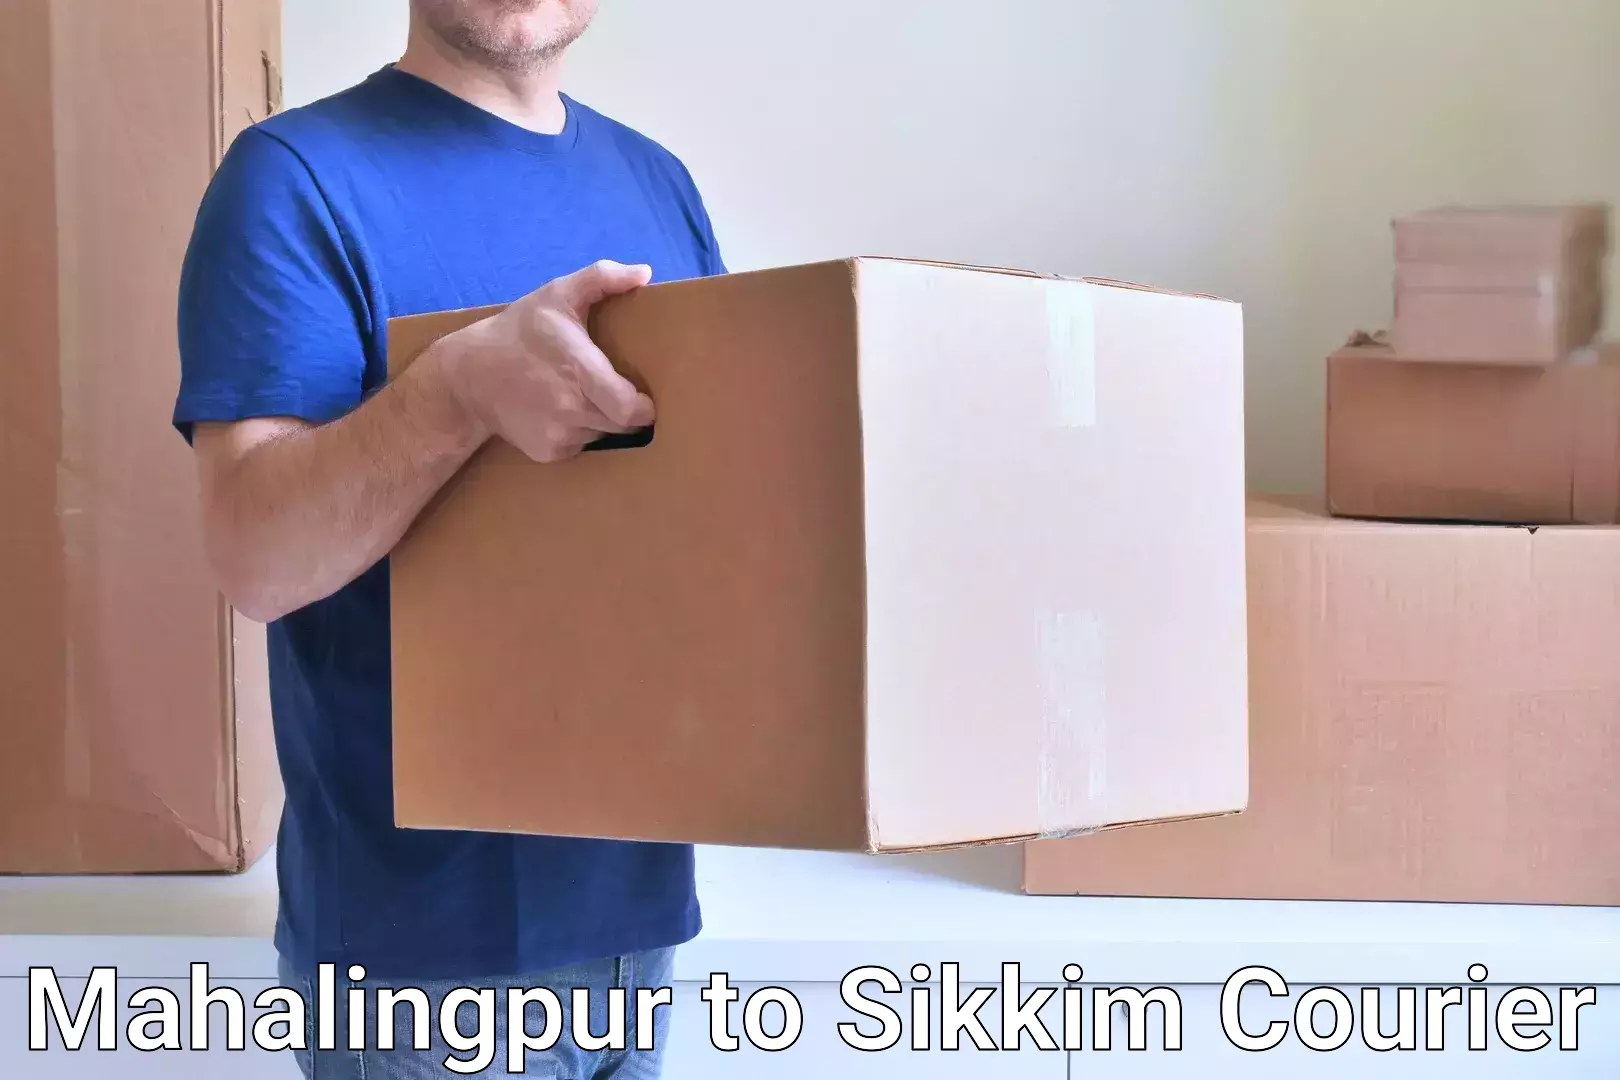 Fast delivery service Mahalingpur to East Sikkim